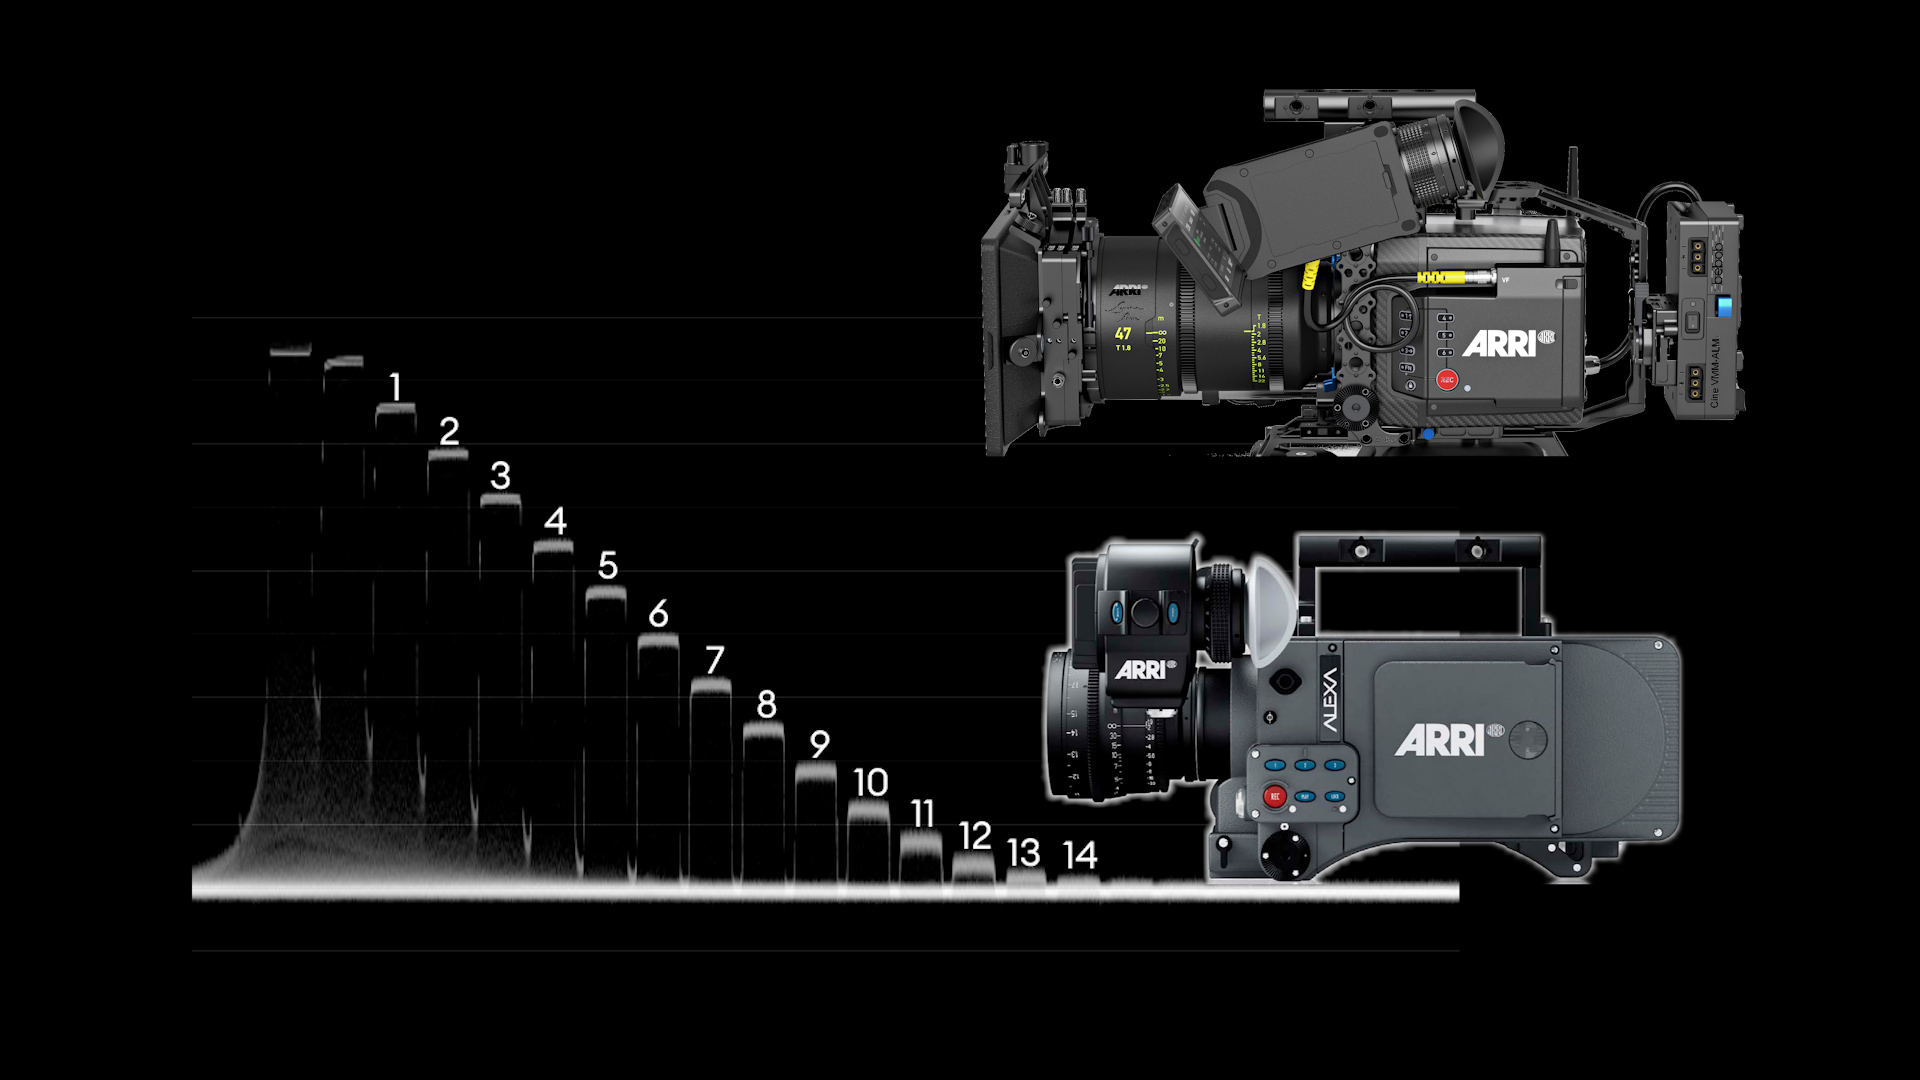 The Differences Between The Alexa Mini LF and Sony Venice — The